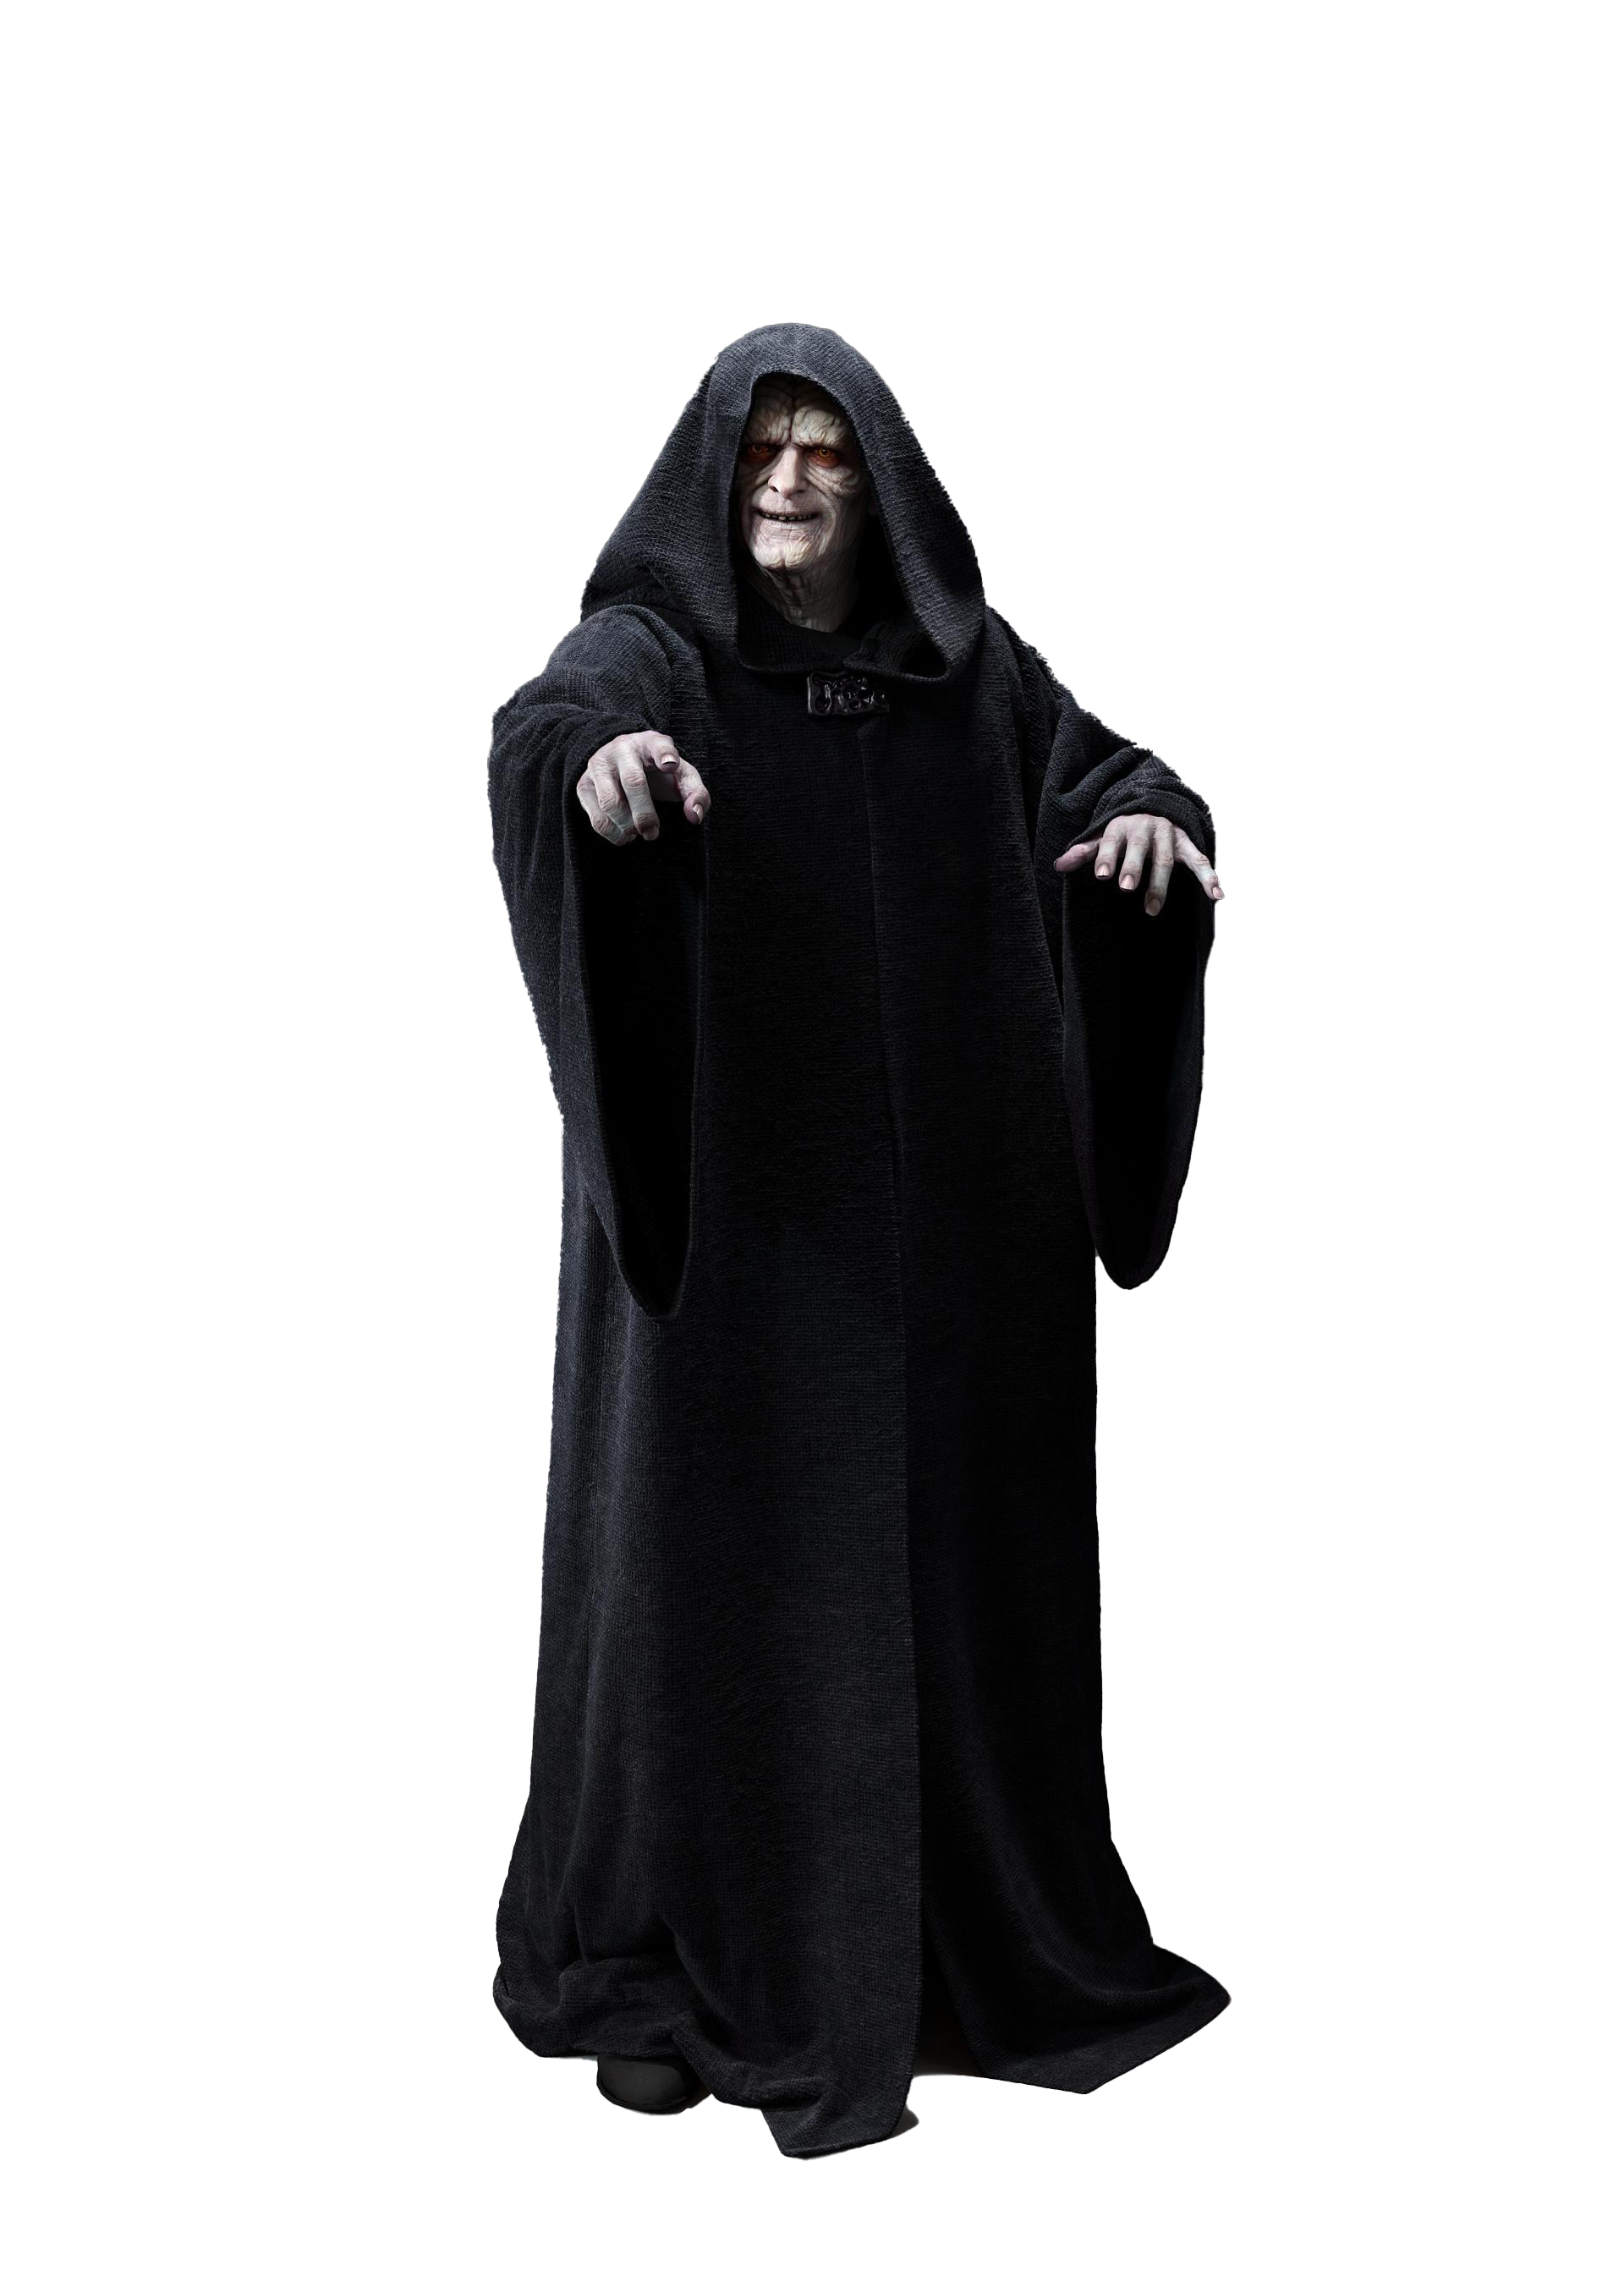 Superstar Crises Cover Palpatine Thunder PNG